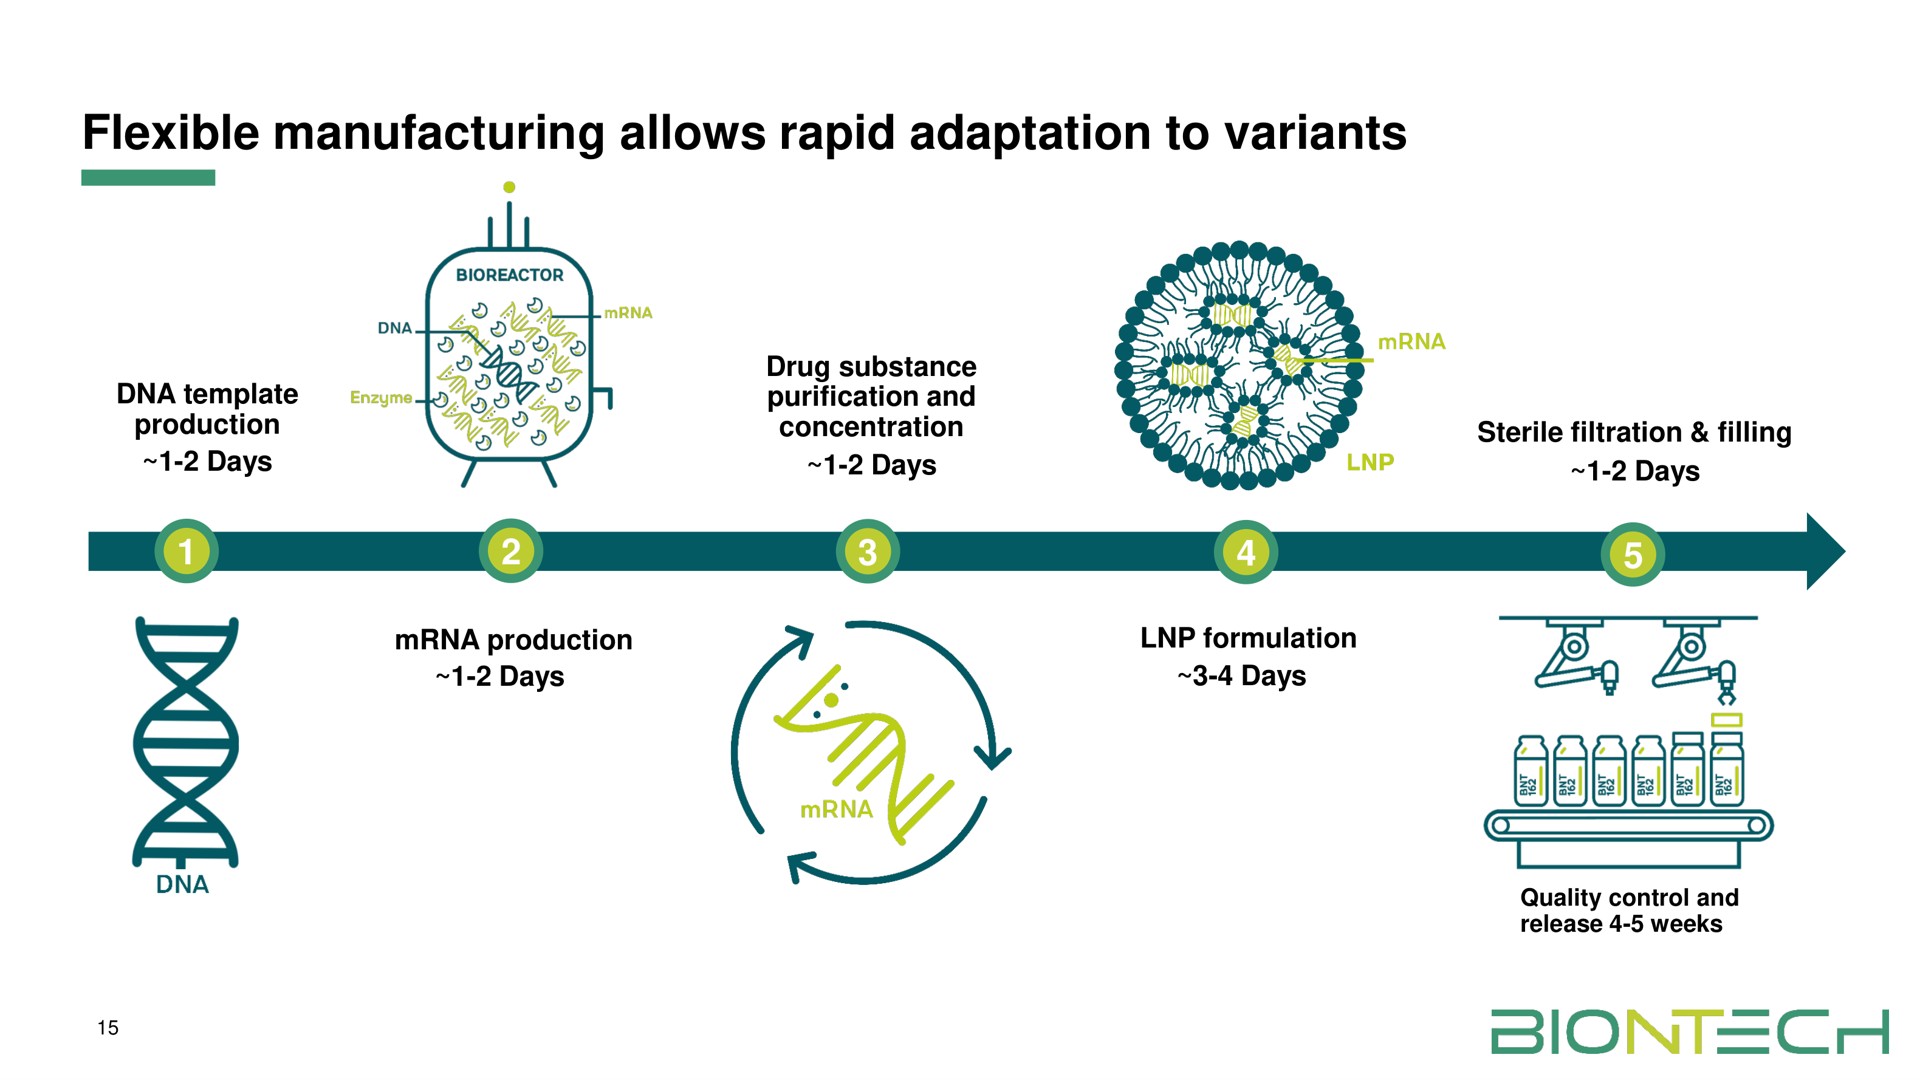 flexible manufacturing allows rapid adaptation to variants | BioNTech